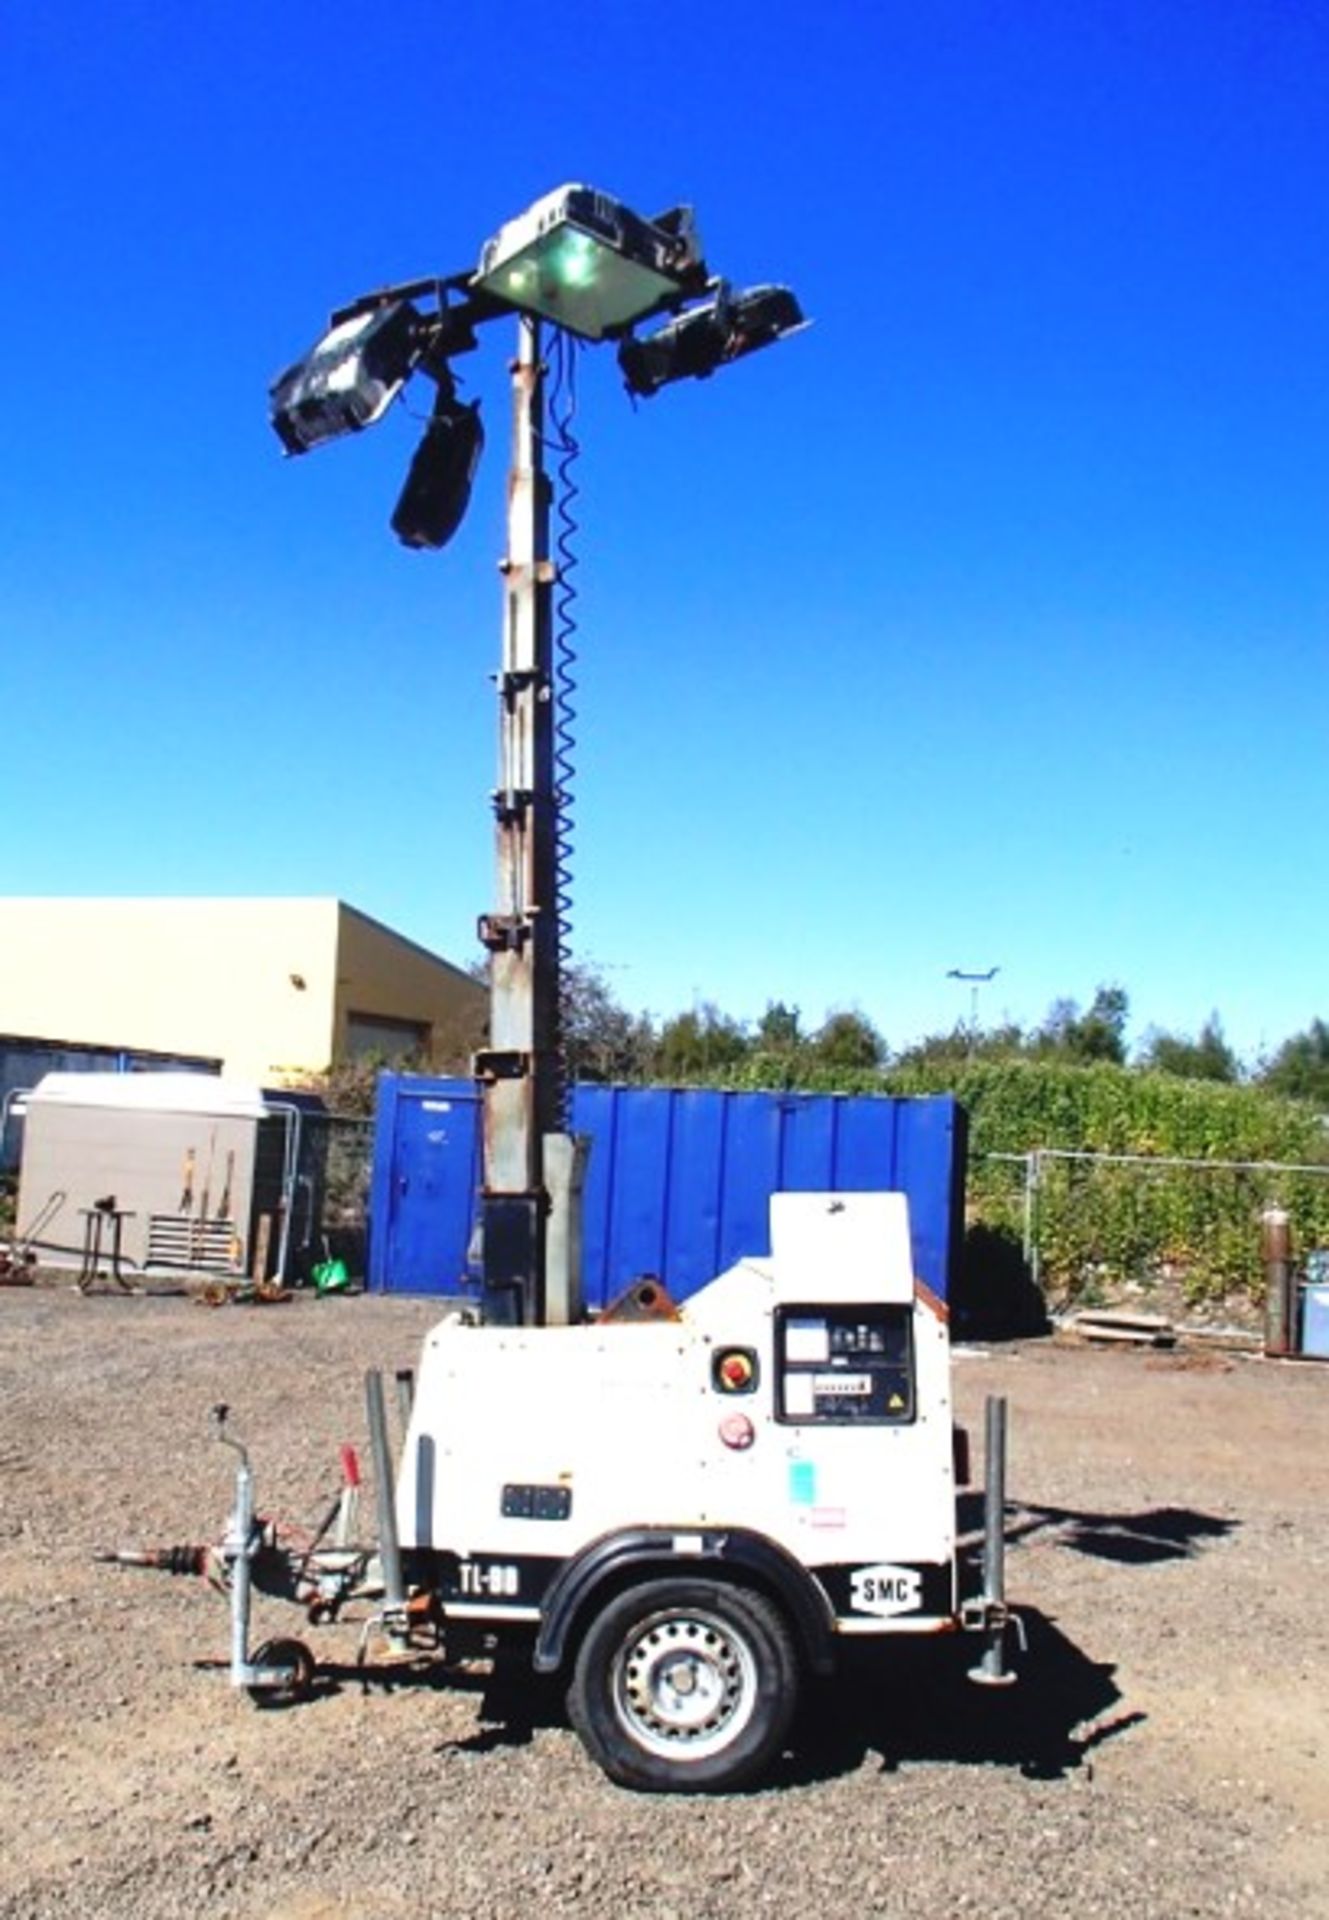 2010 SMC TL-90 SN t90108721 TOWABLE TOWER LIGHTS. ENGINE POWR 7.7KW@1500RPM. 932 HRS - Image 4 of 6